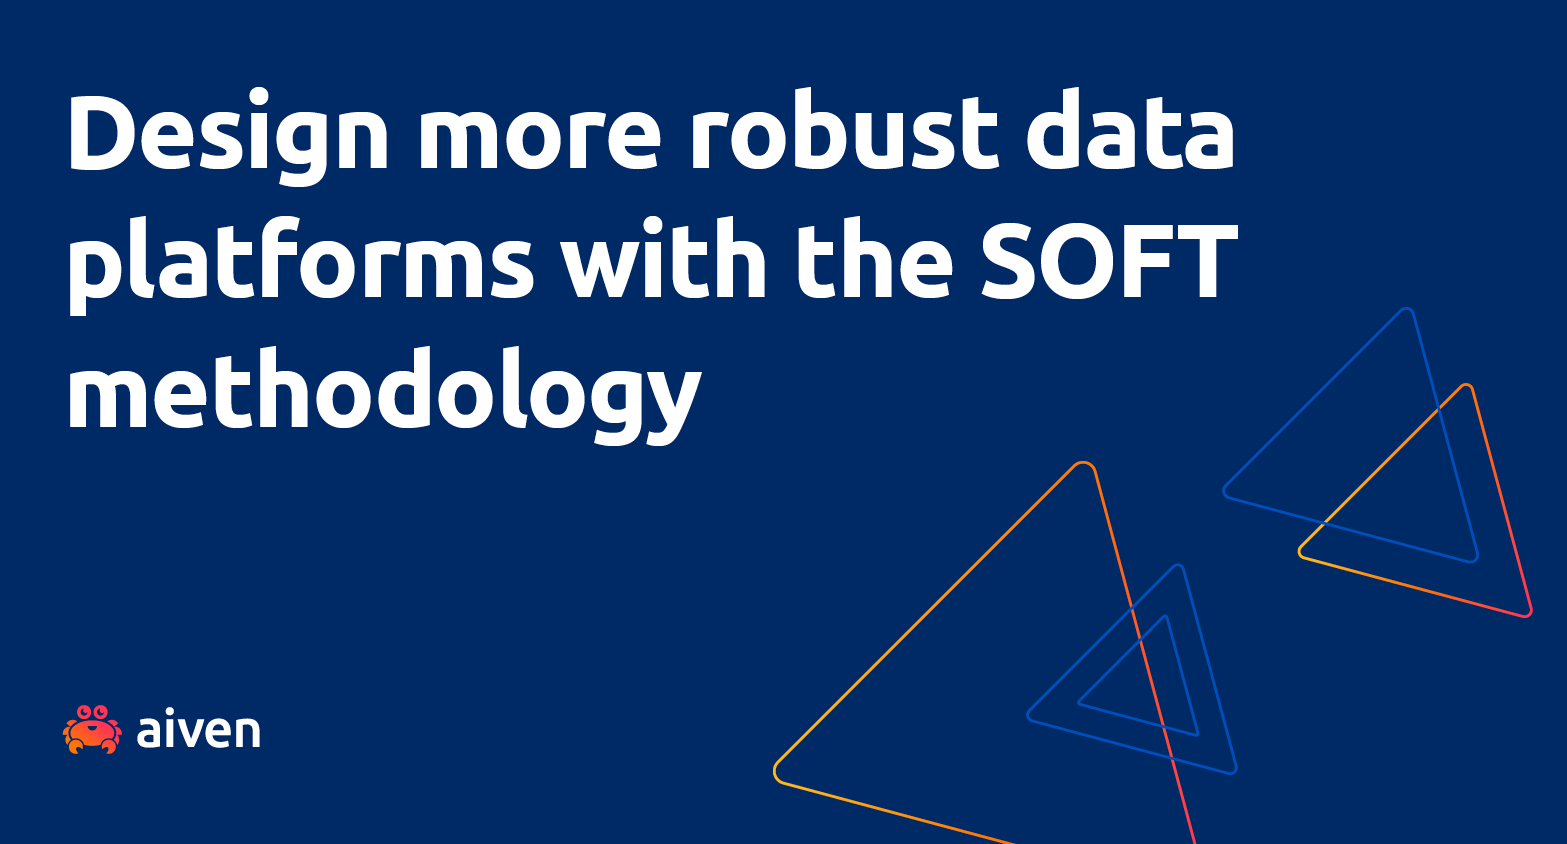 Making robust and future-proof decisions about your data setup can be complex. The SOFT methodology is here to guide you to the right choices for your needs.